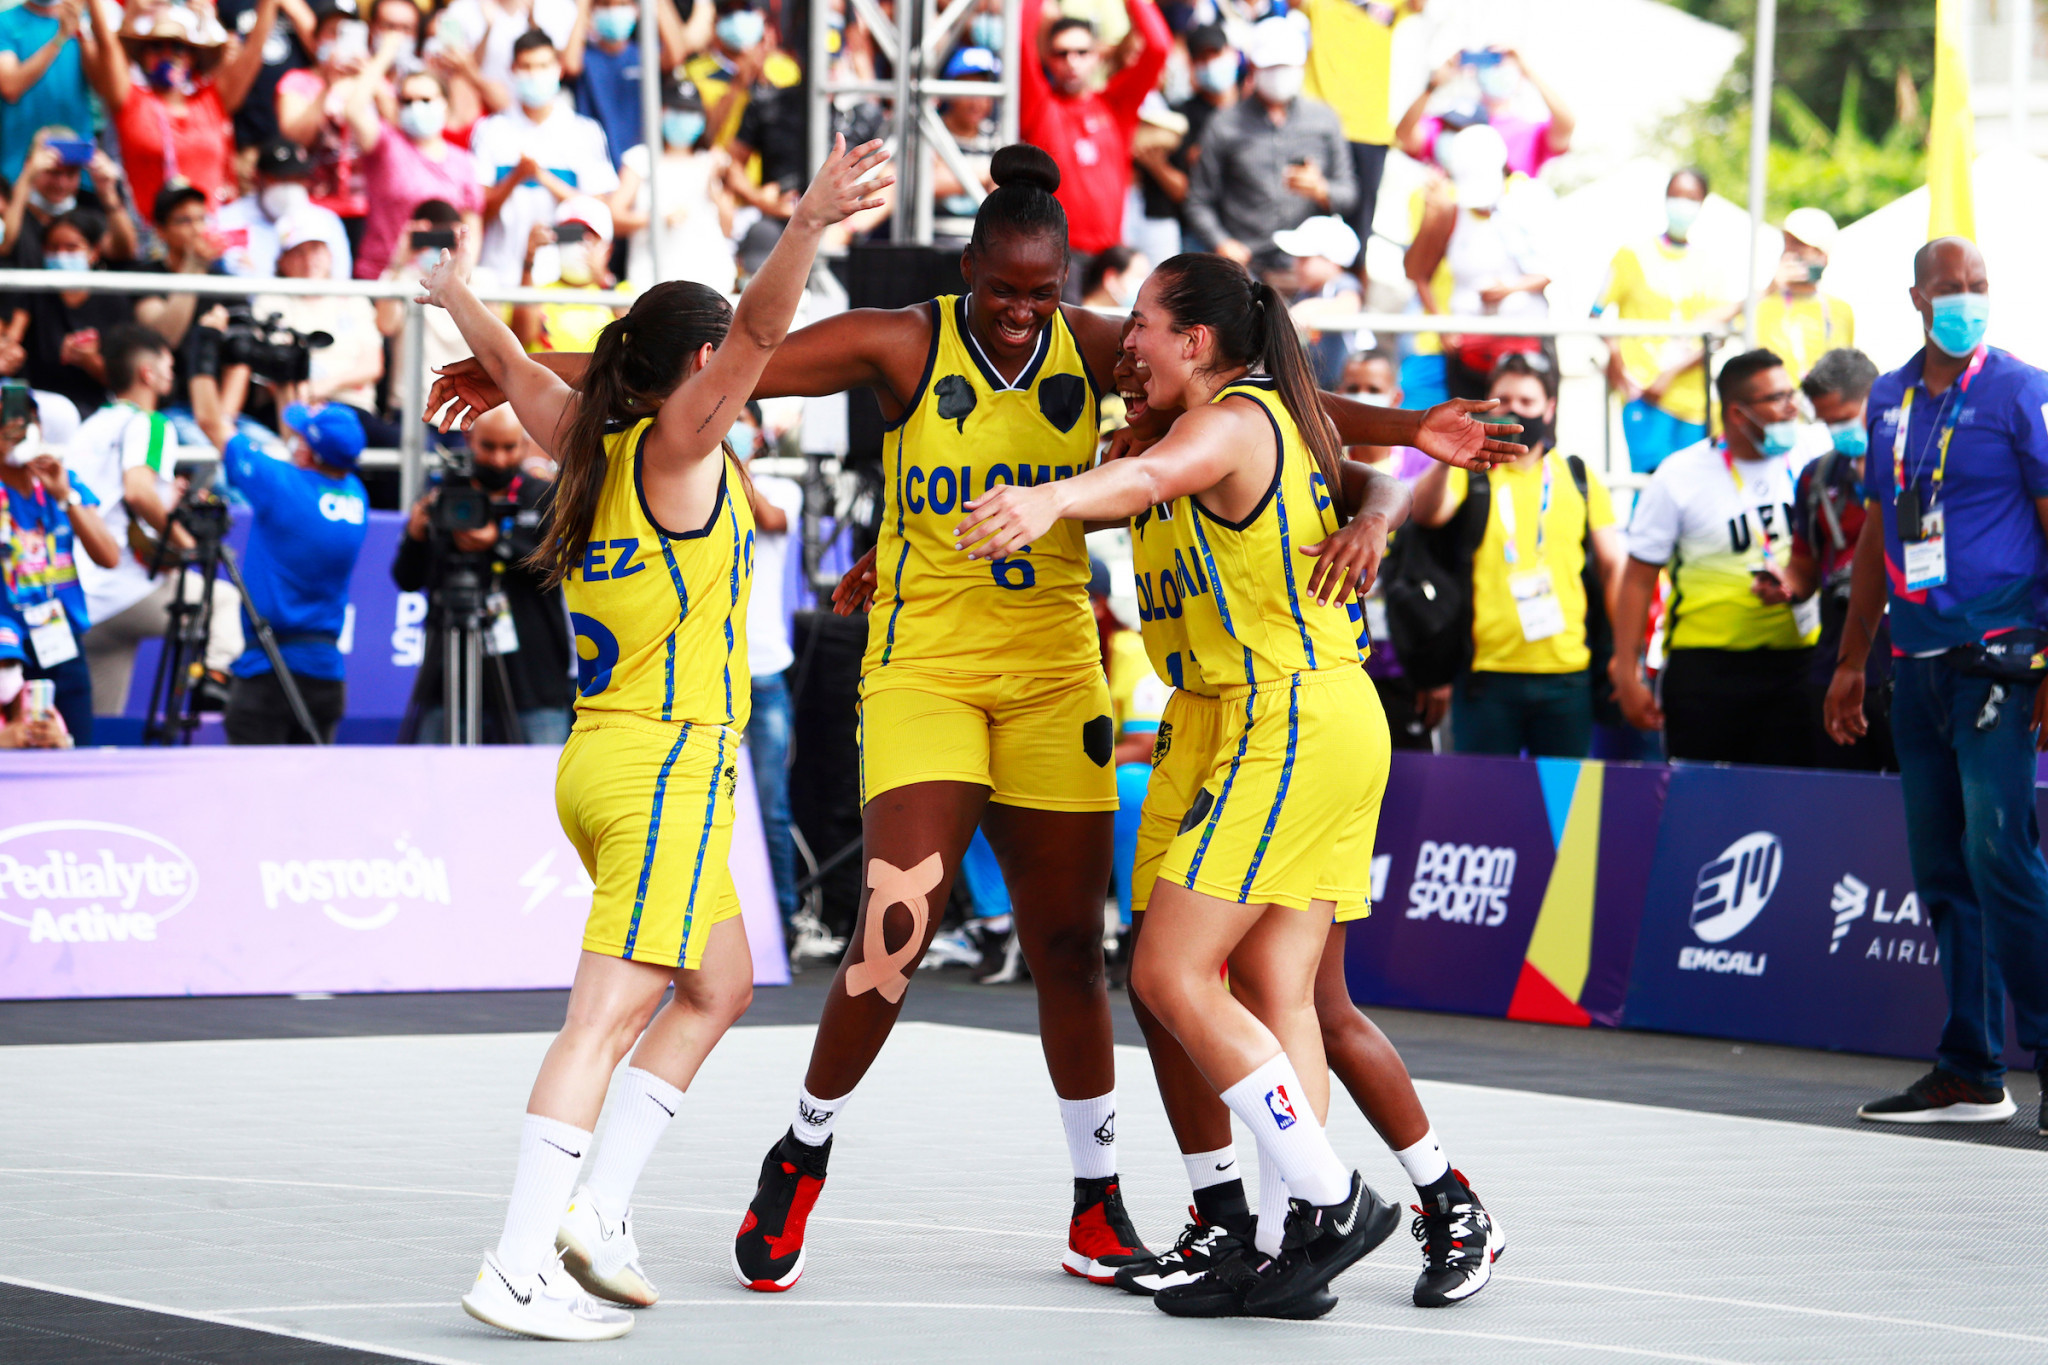 Colombia recorded a 20-17 win against the Dominican Republic to claim the women's 3x3 basketball gold medal ©Agencia.Xpress Media